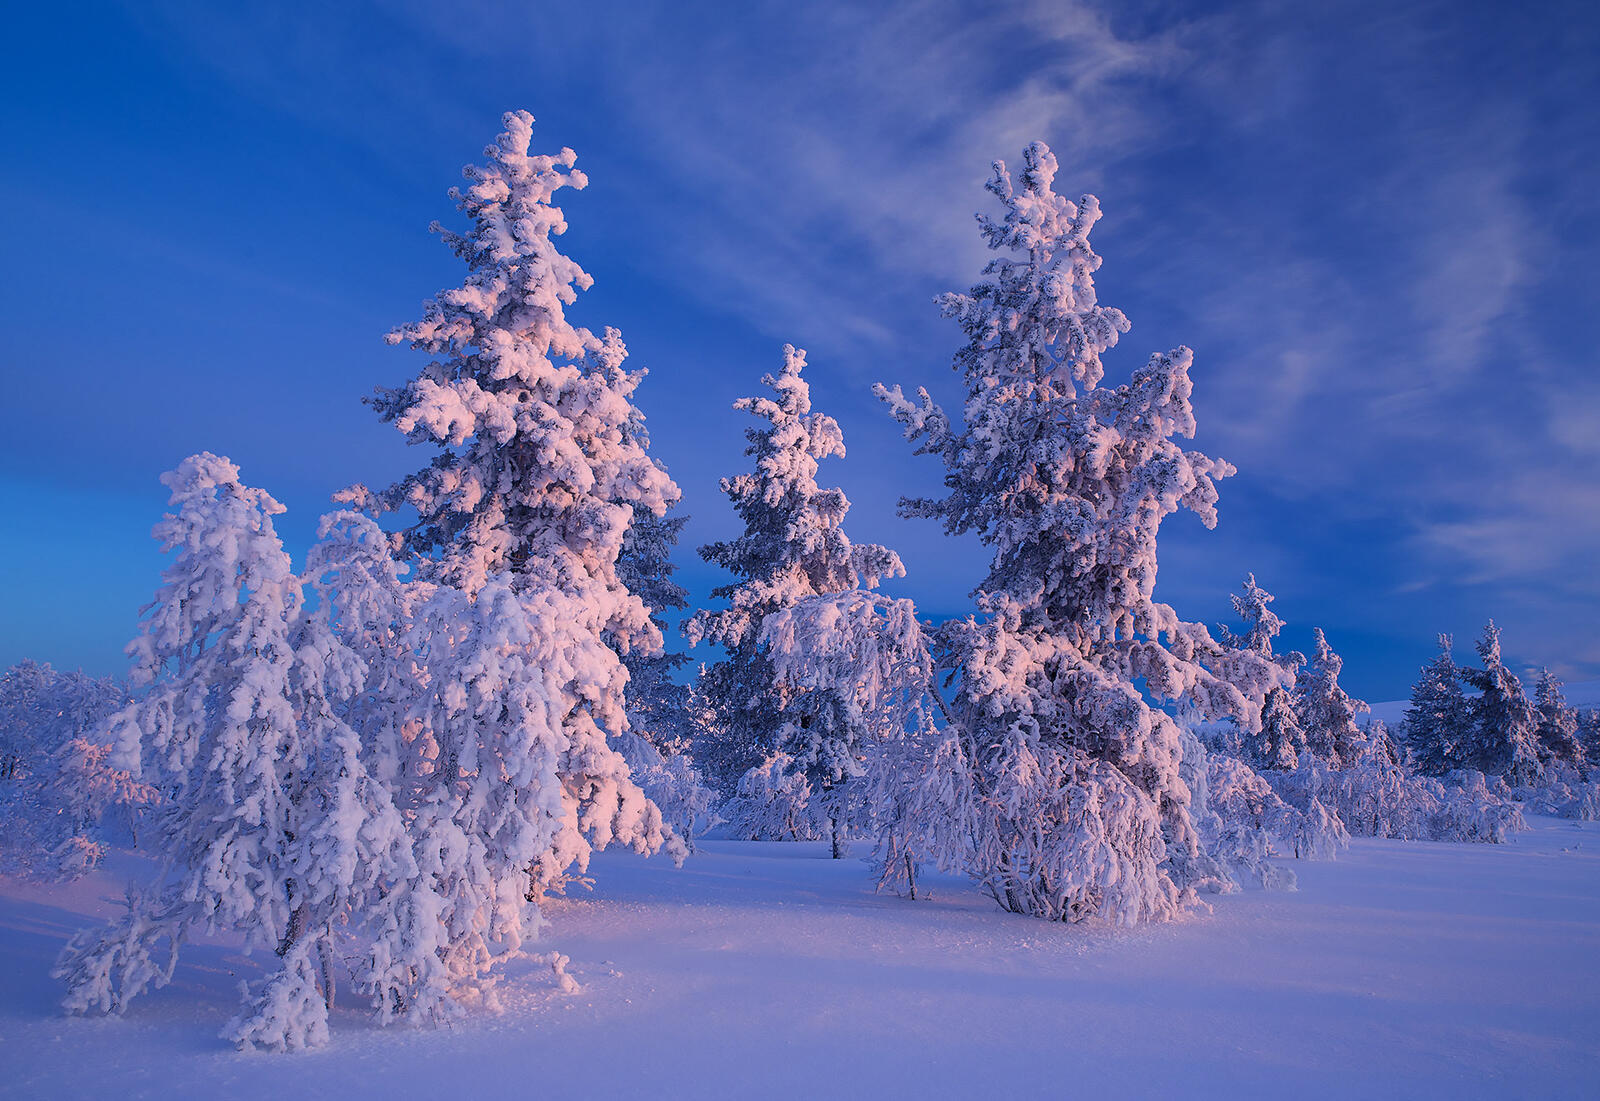 Wallpapers trees sunset Lapland on the desktop